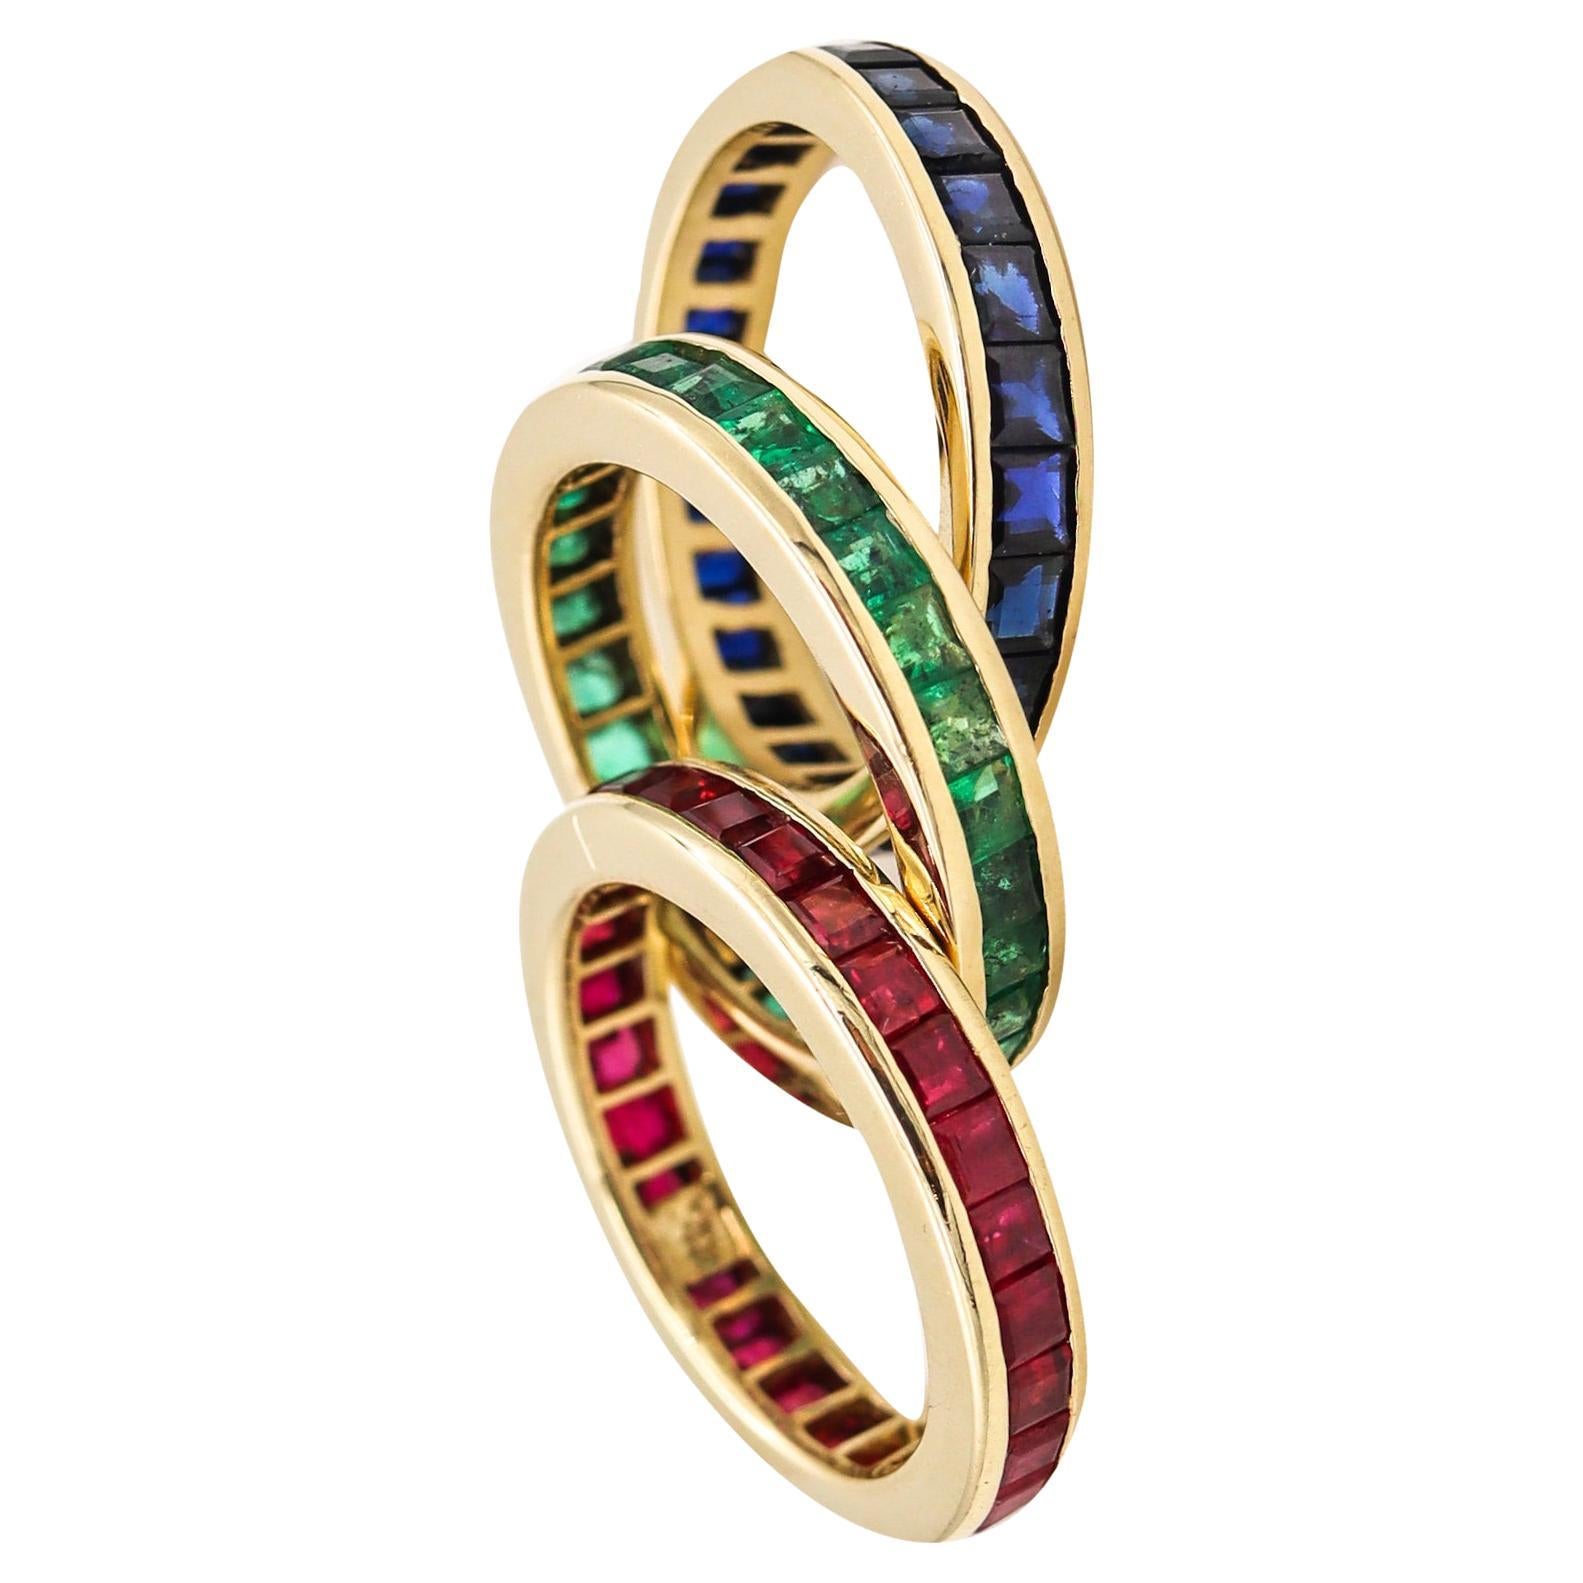 Eternity Trio Of Rings Bands In 14 Kt Gold 6.90 Ctw Sapphires Emeralds & Rubies